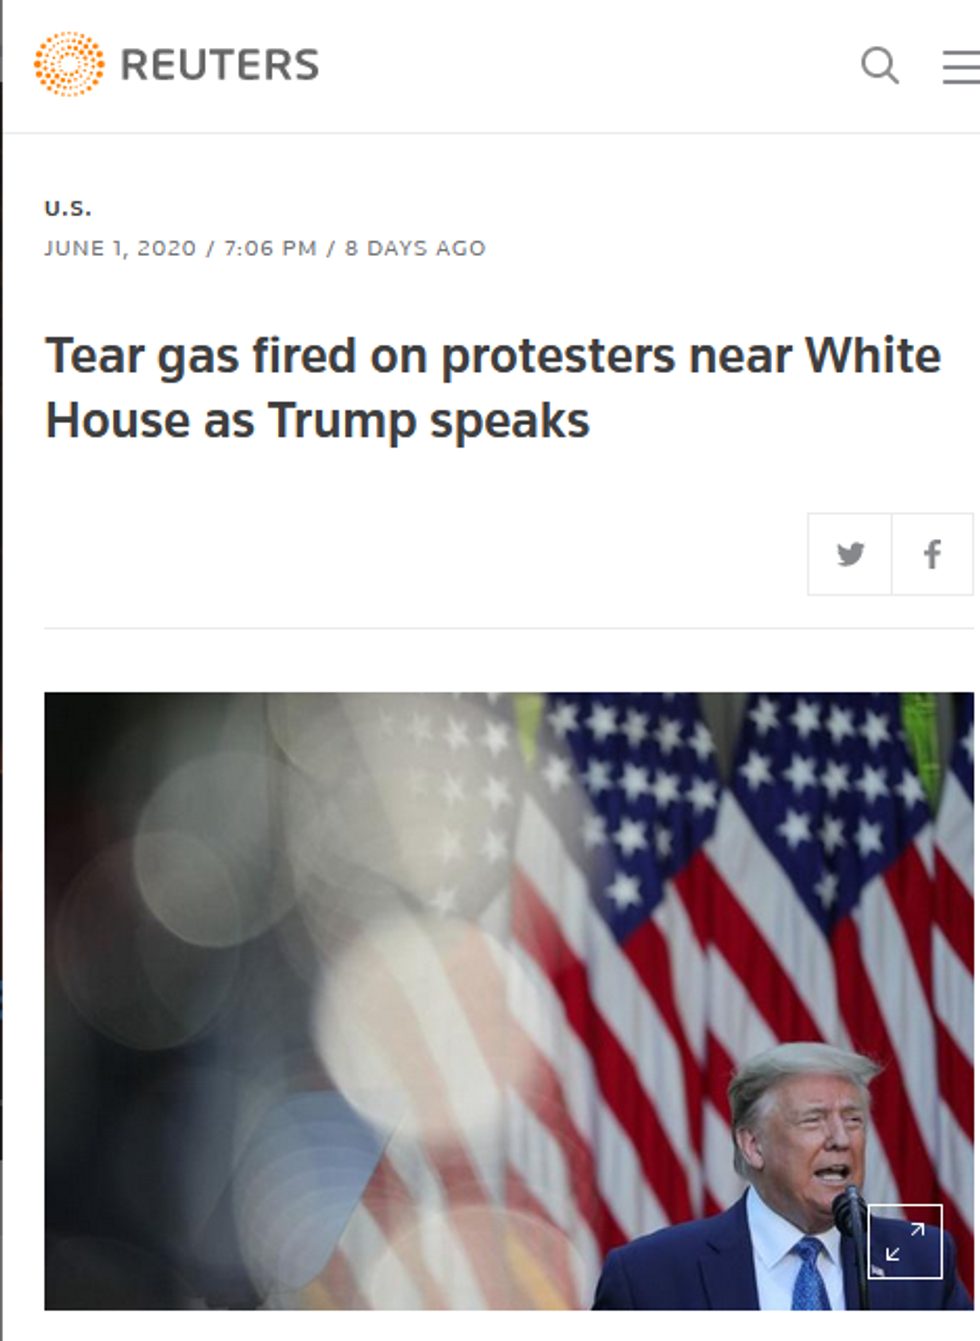 Reuters: Tear gas fired on protesters near White House as Trump speaks